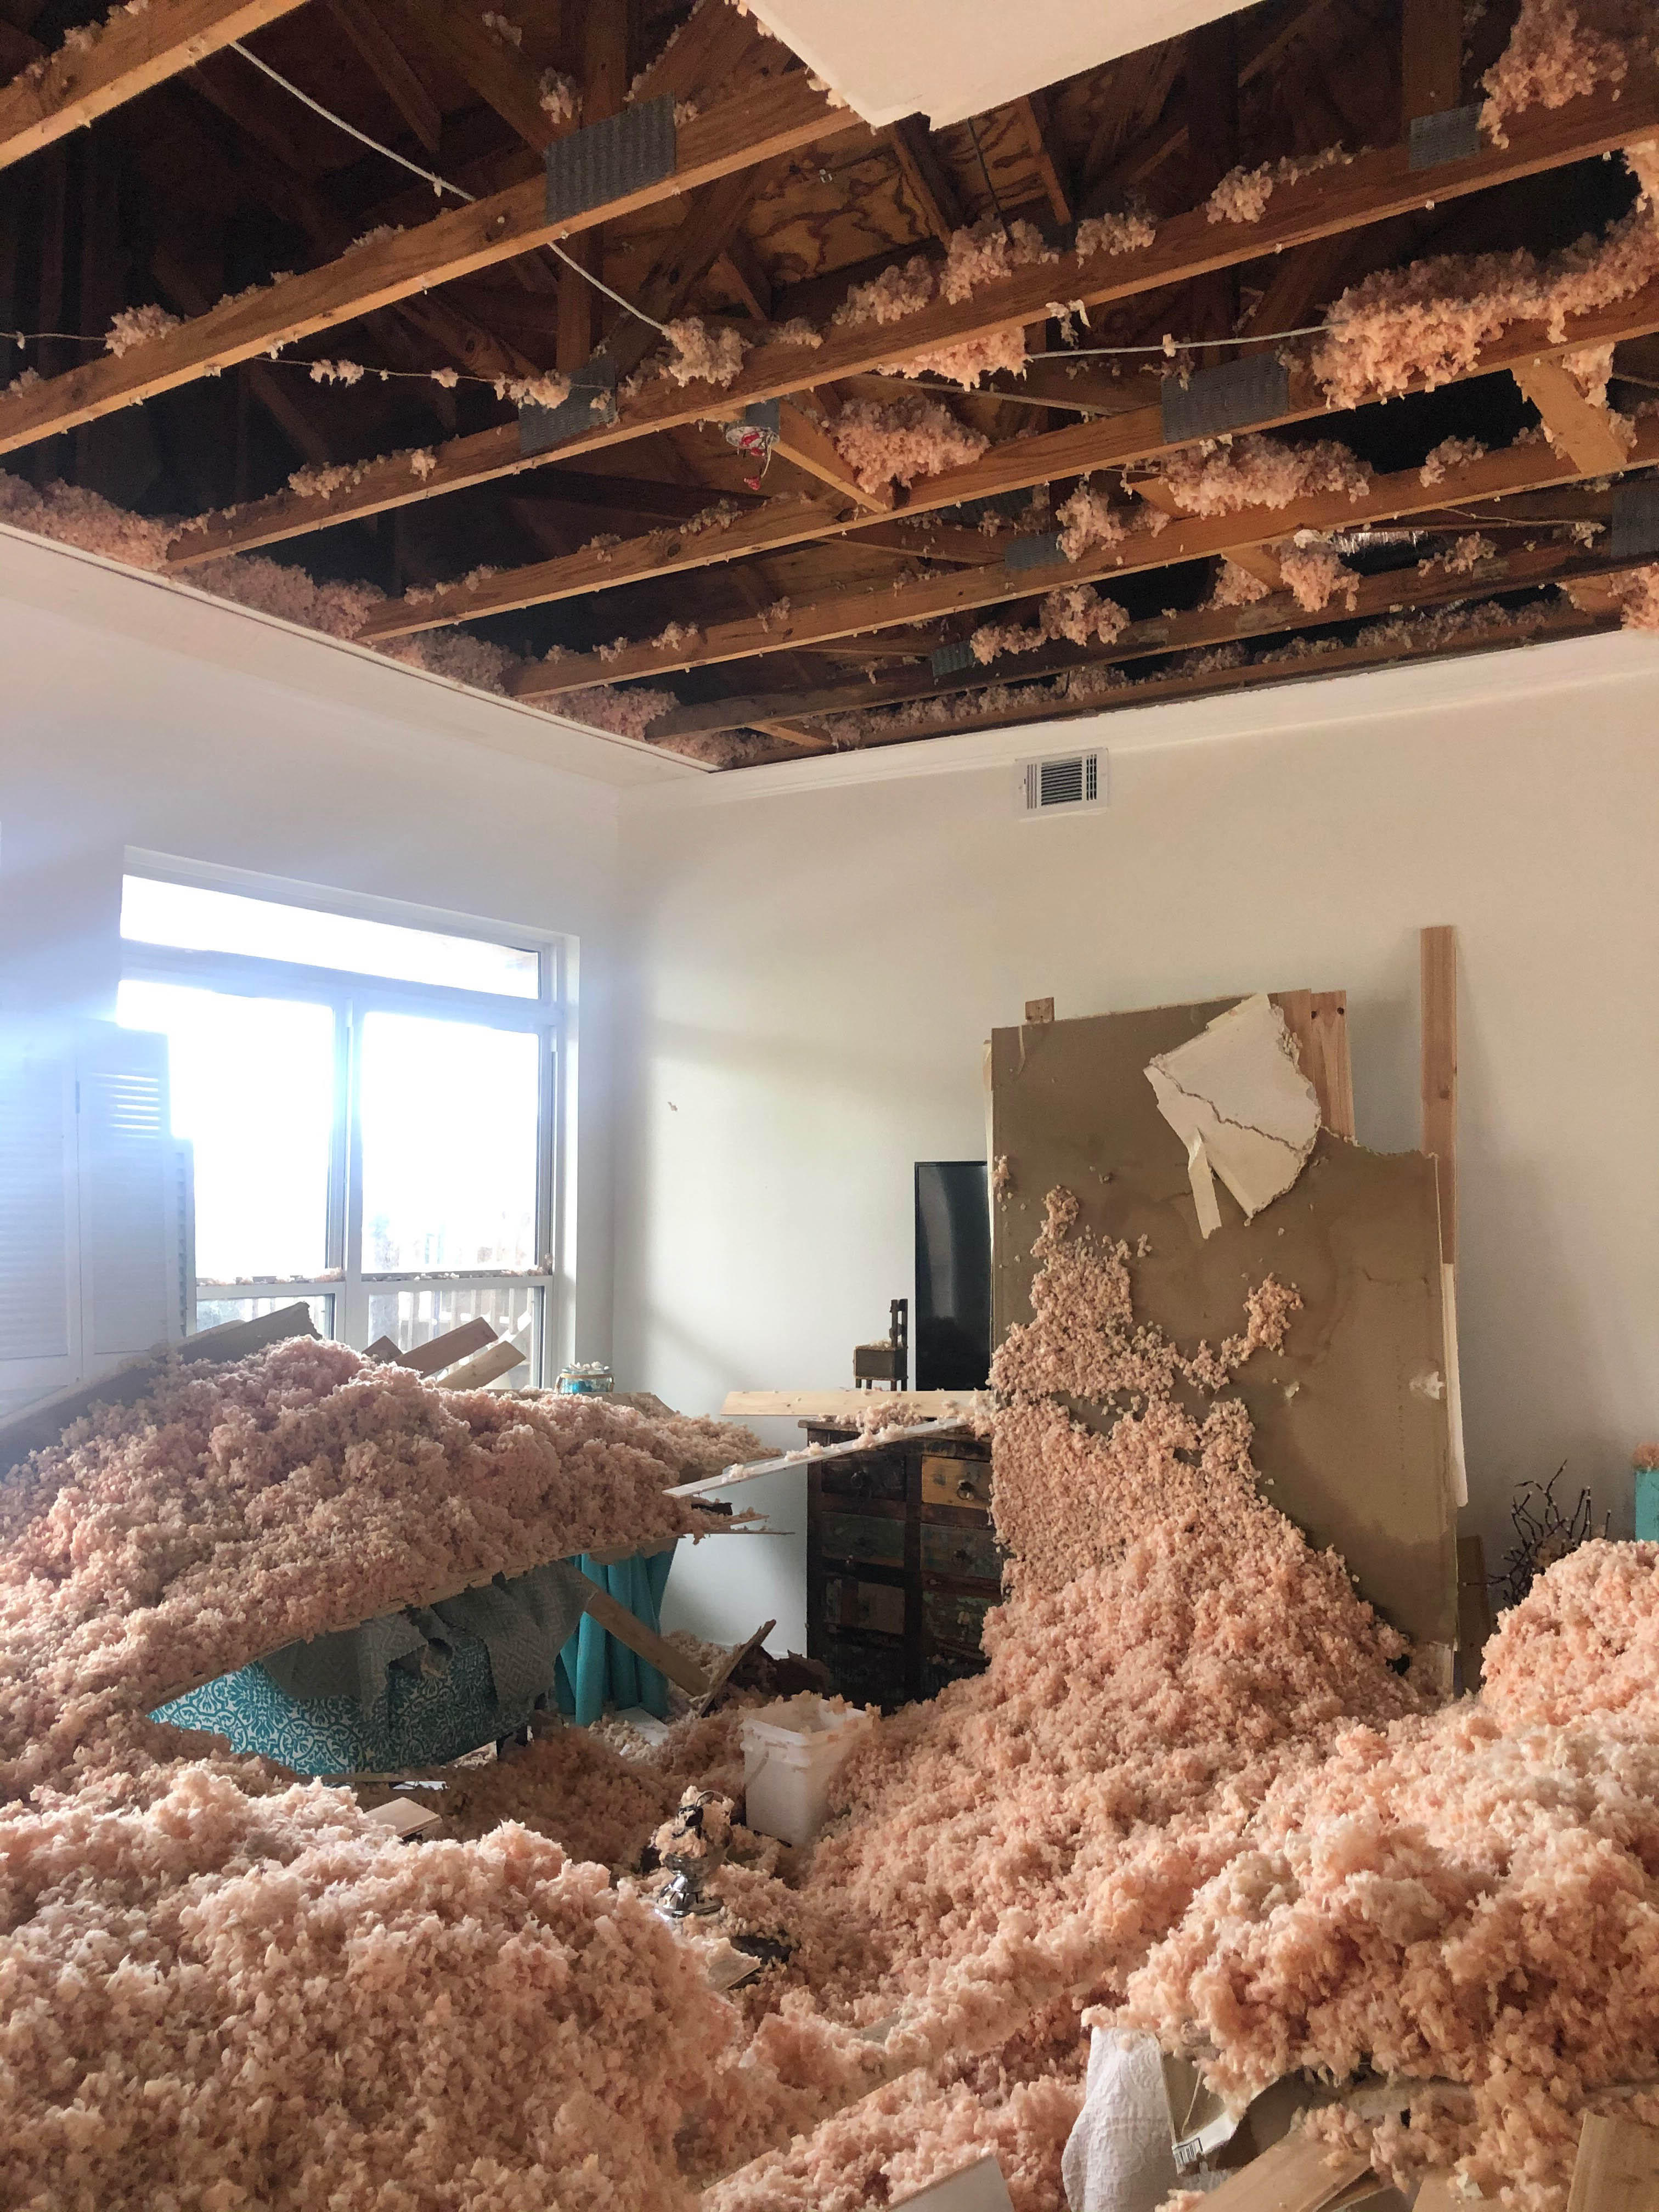 At SERVPRO of Santa Barbara we are water damage restoration specialists and are ready to restore your Santa Barbara, CA home or business back to pre-water damage condition.